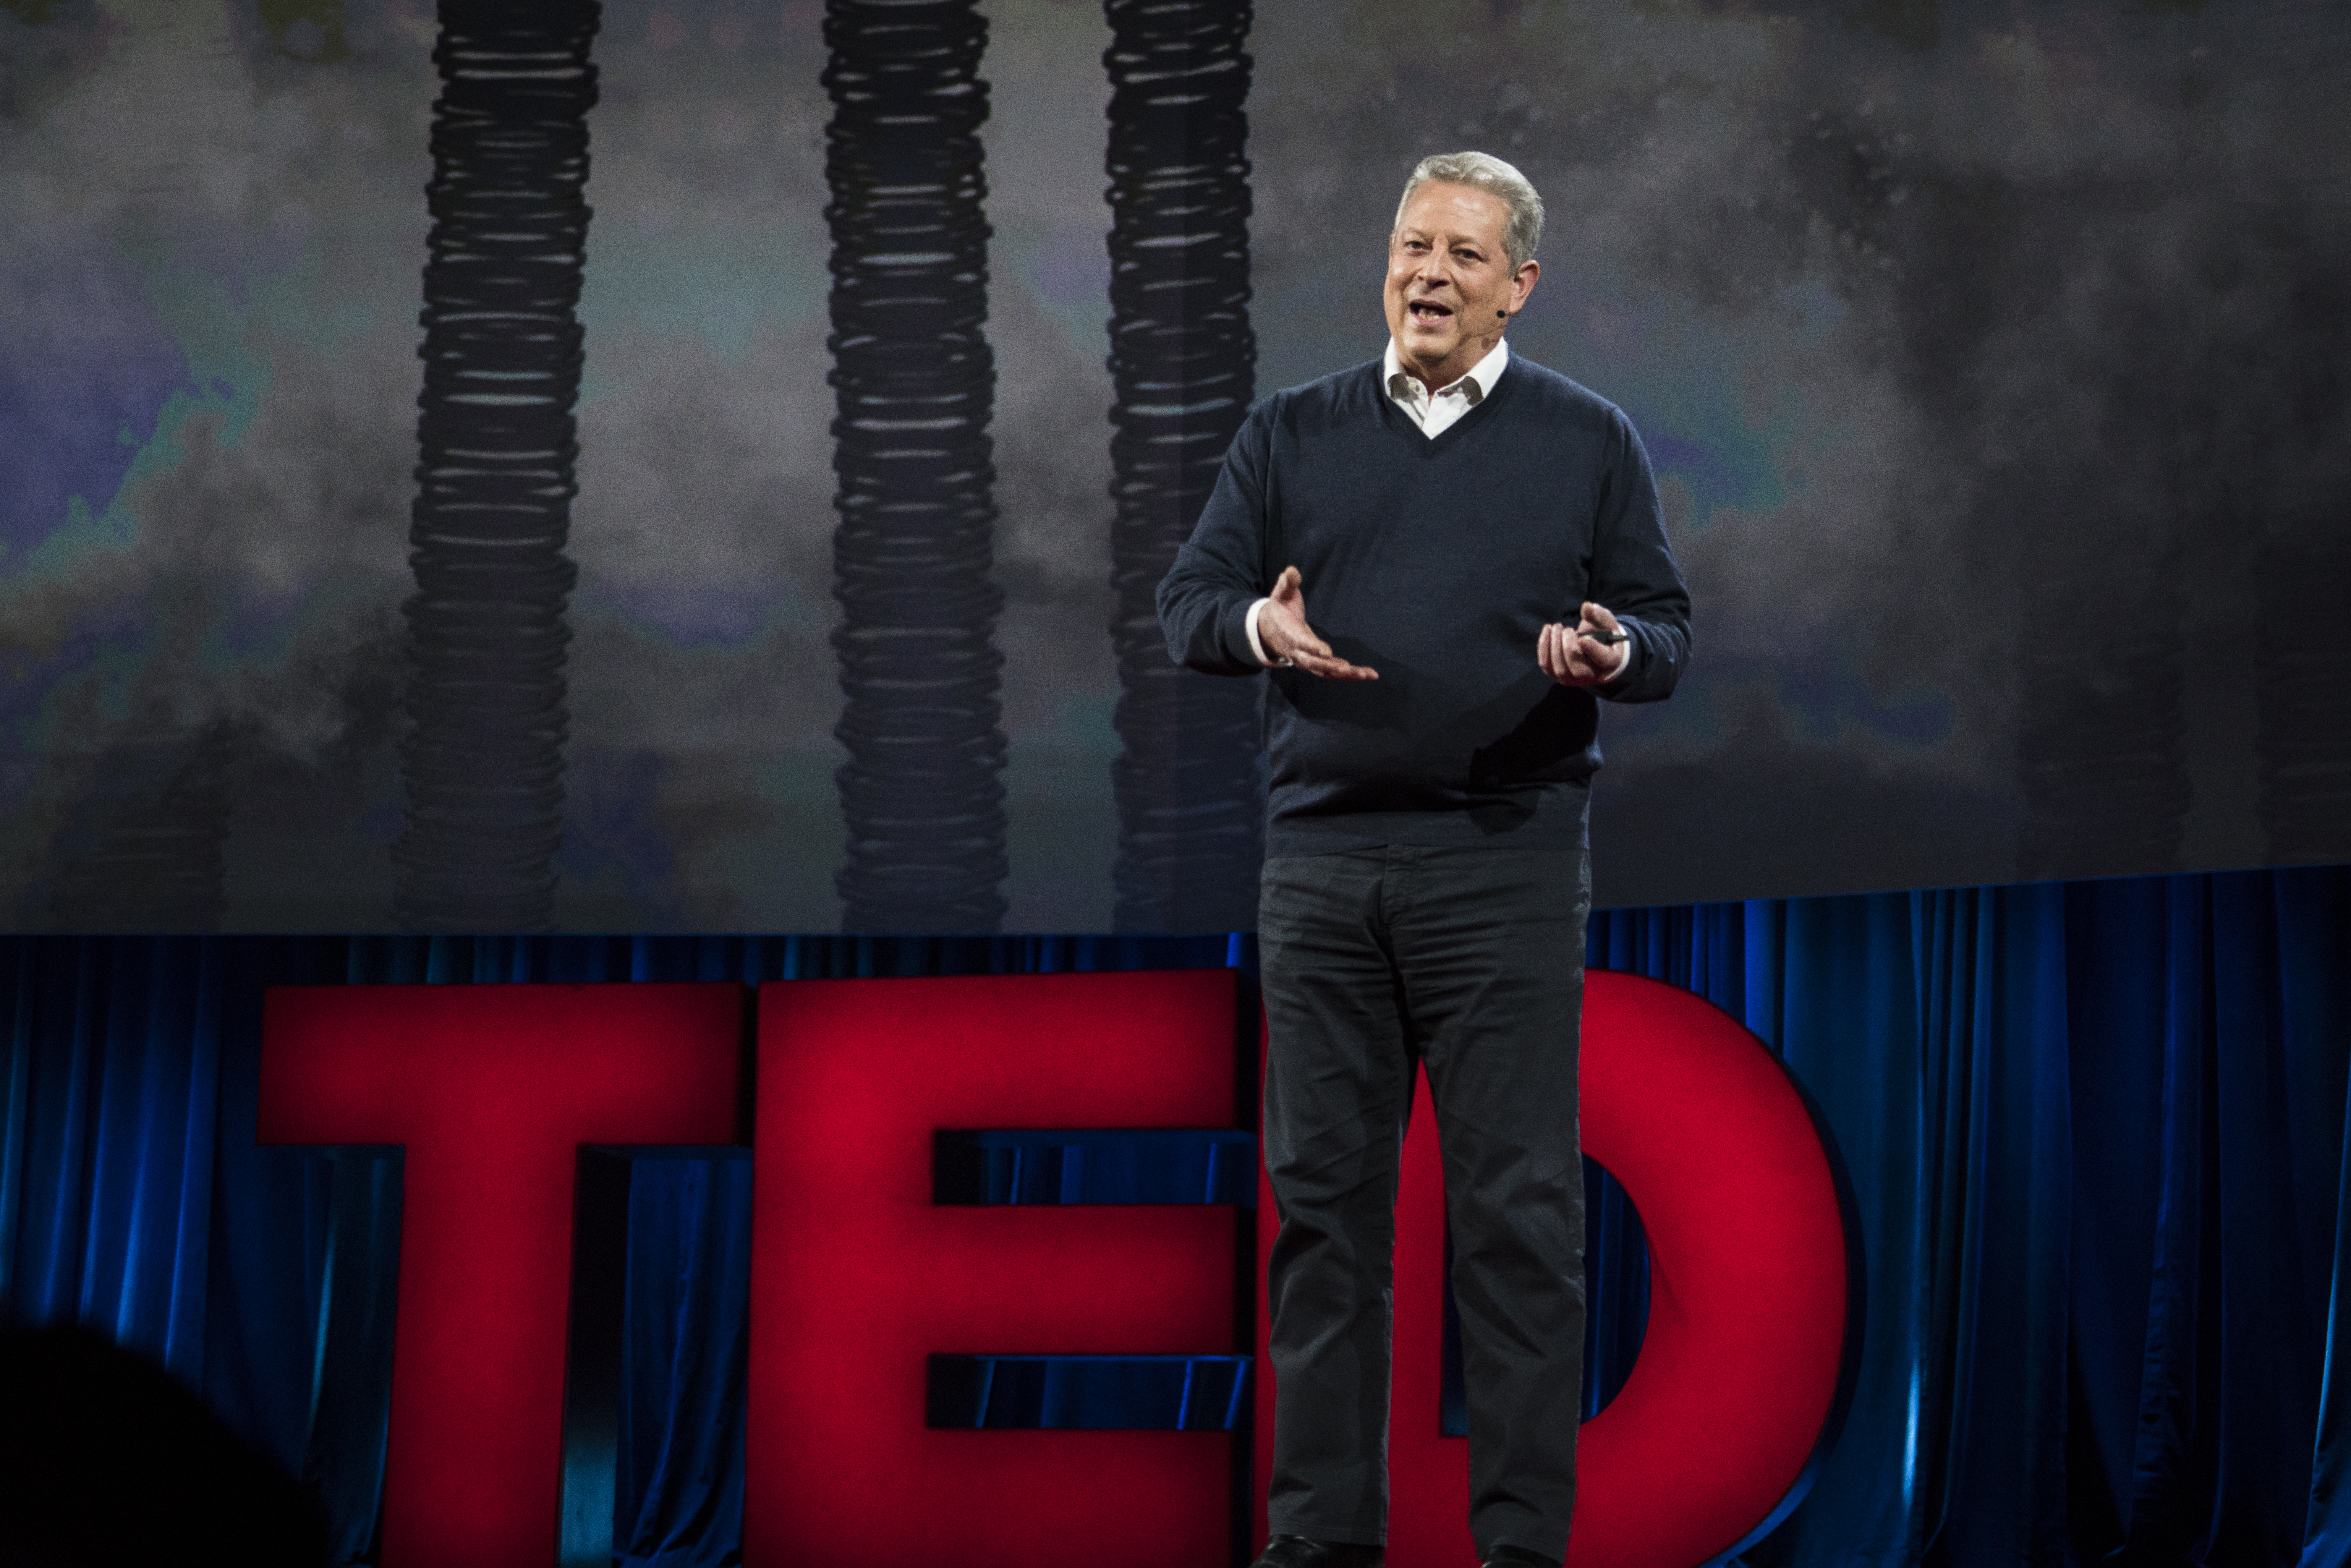 Al Gore feels optimistic about climate change. 6 stats he shared at
TED2016 that show why.